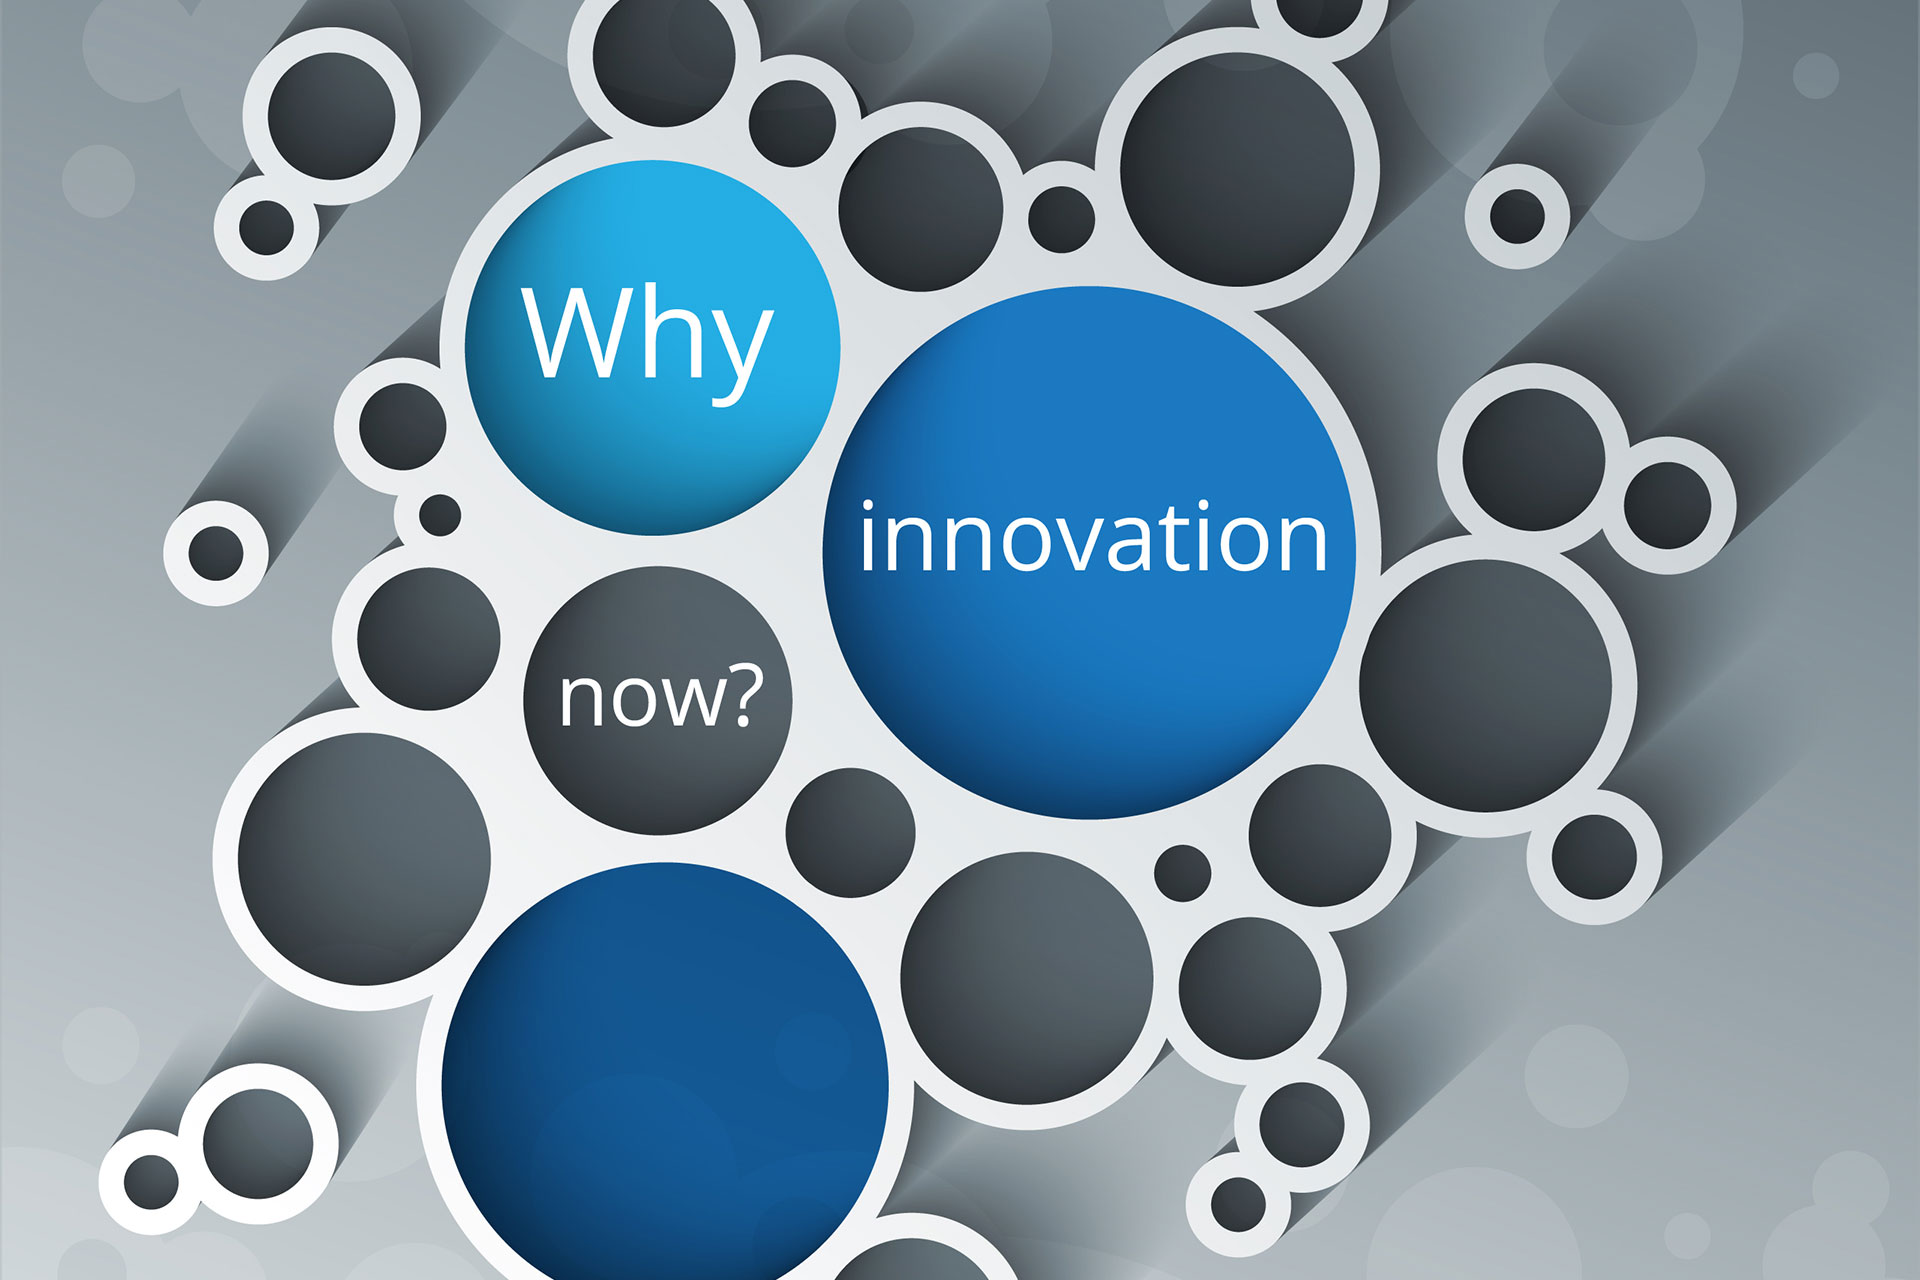 Innovation 101: Why Innovation Now?